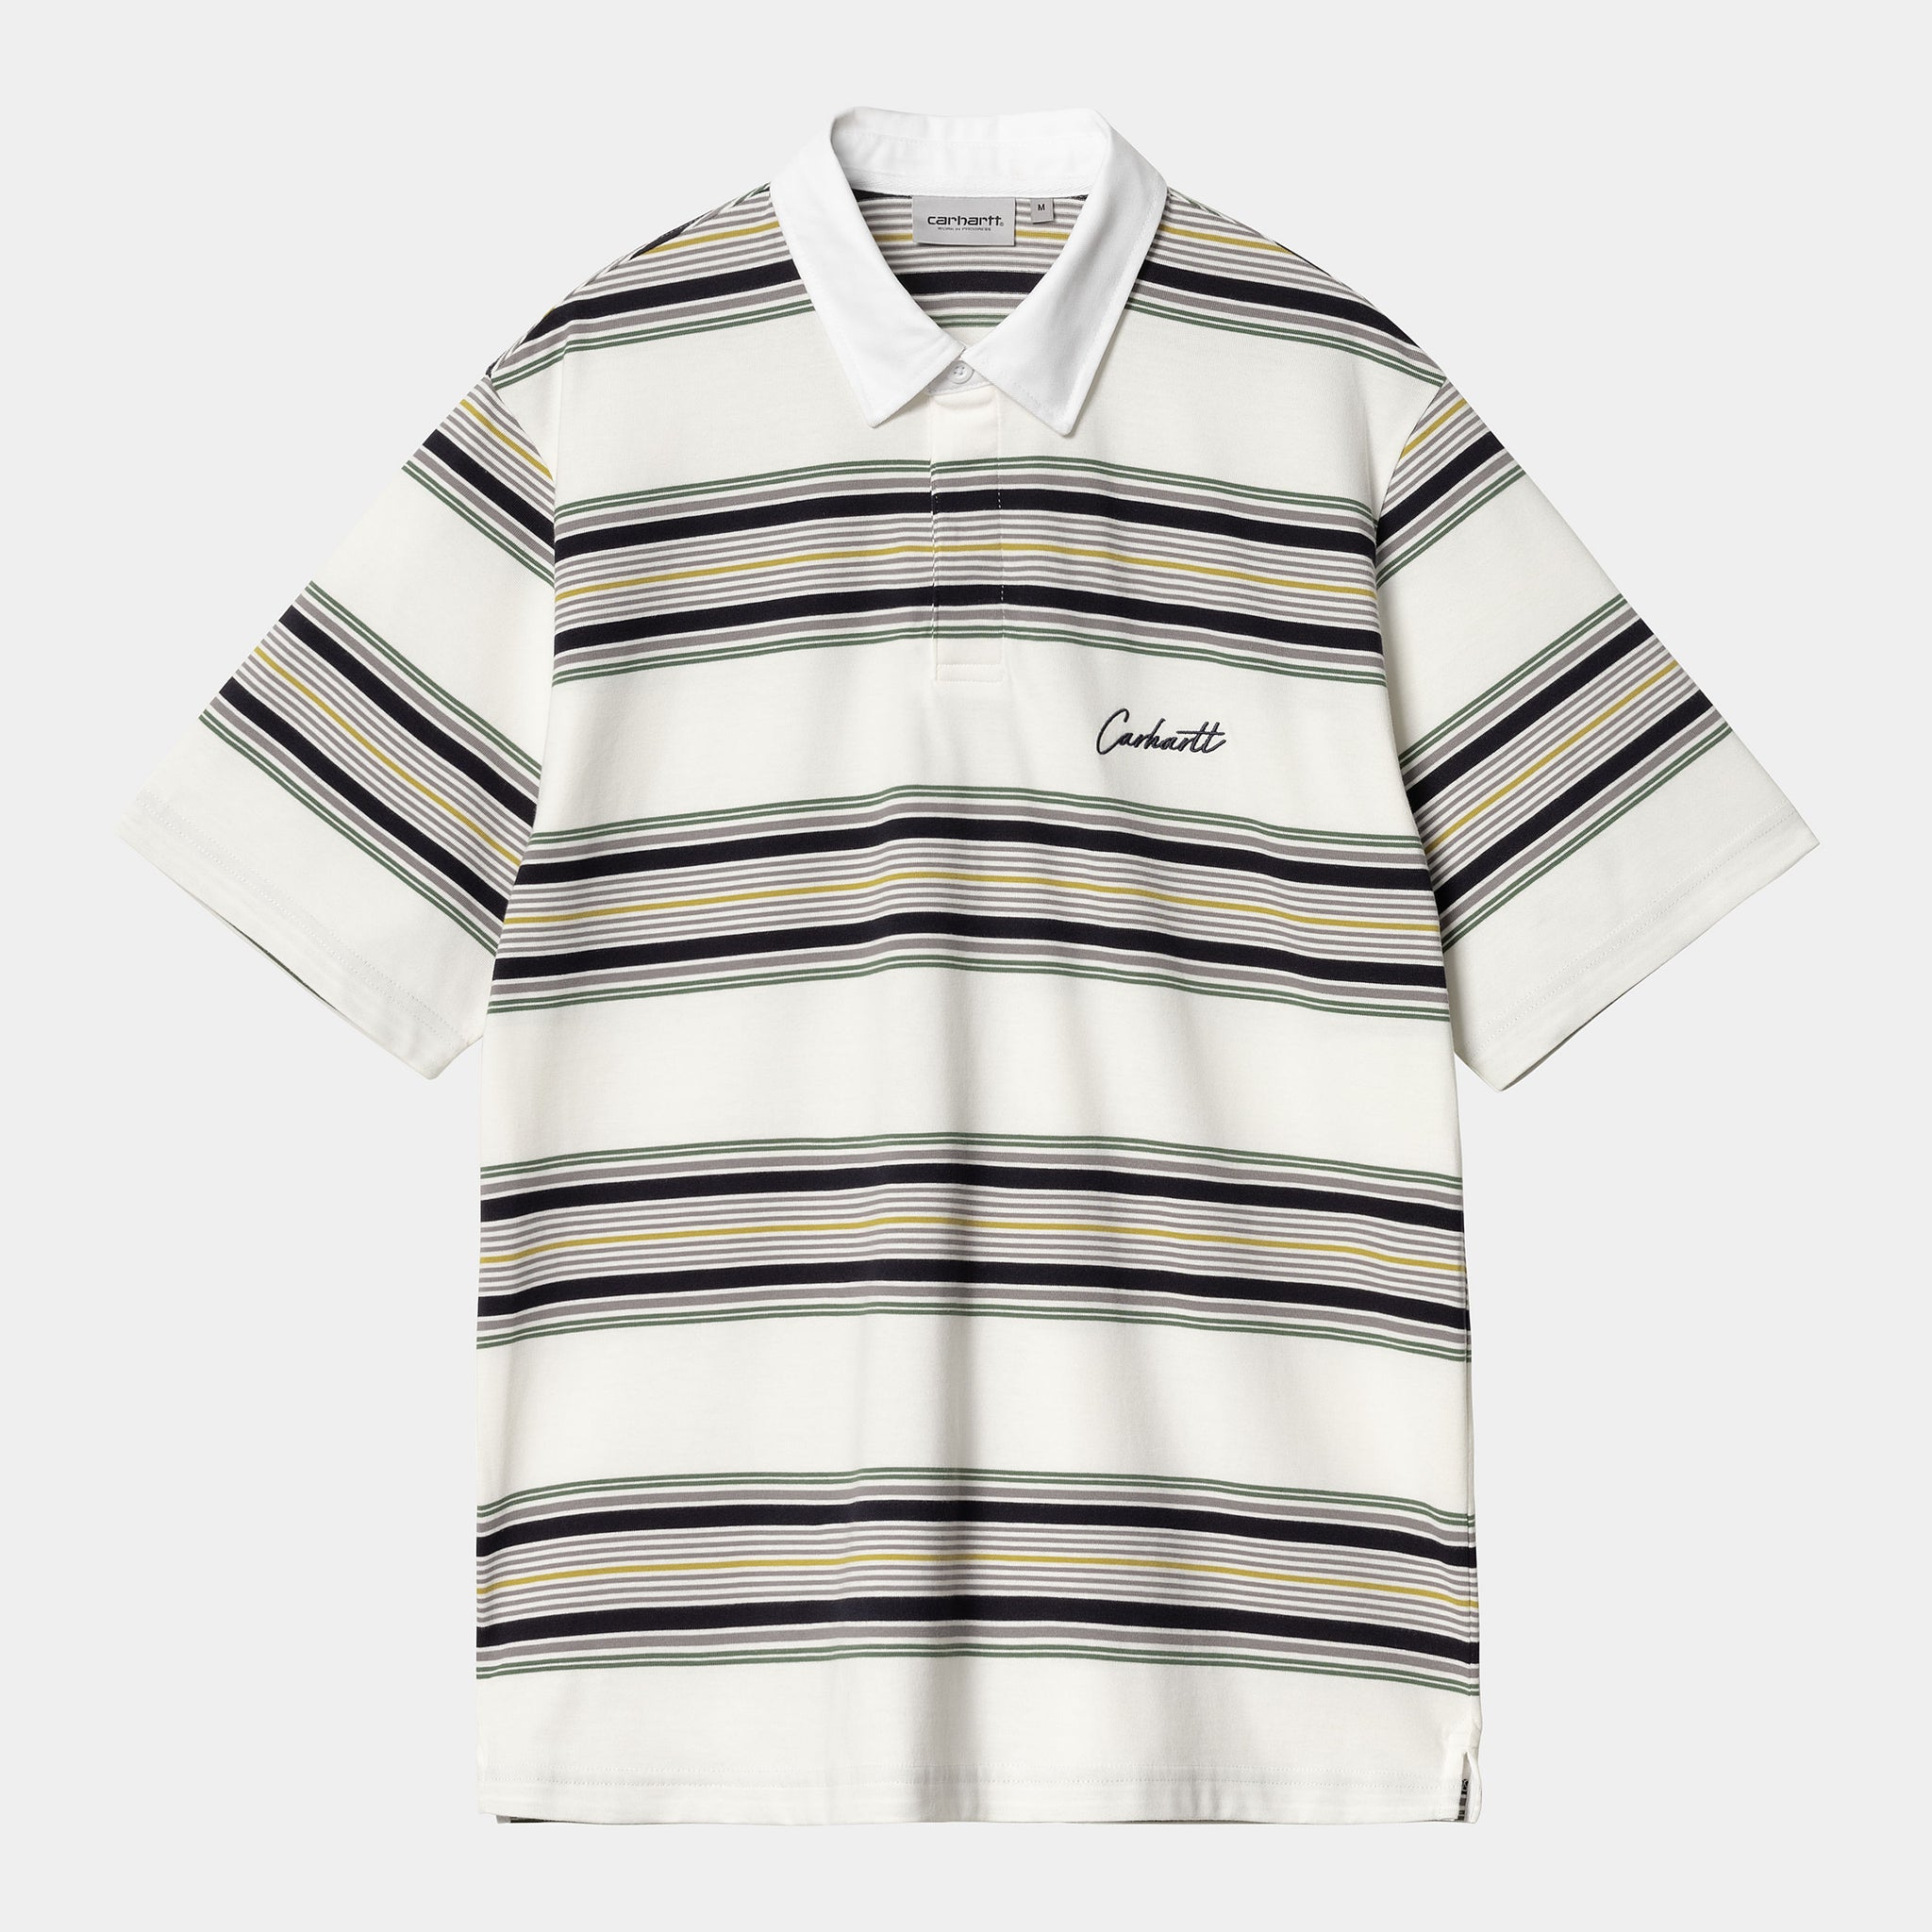 S/S Gaines Rugby Shirt (Gaines Stripe, Wax)